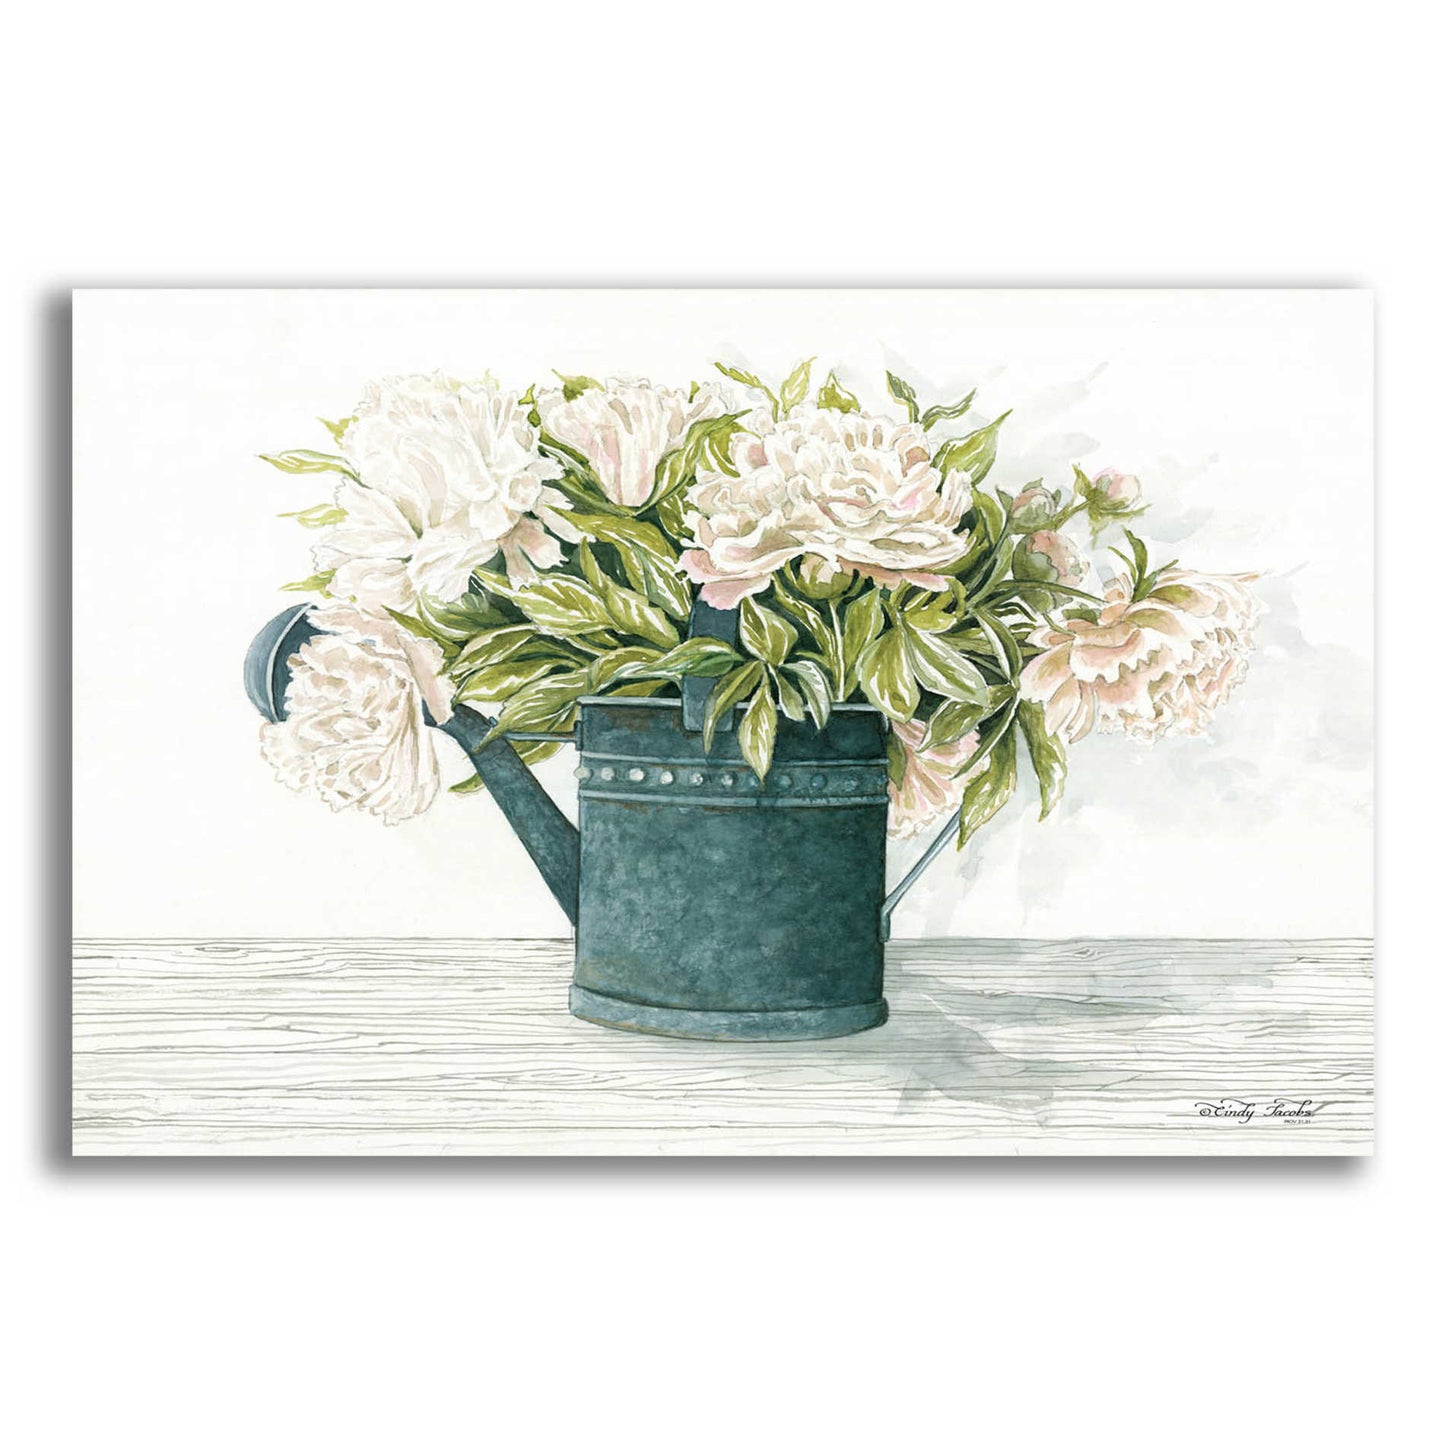 Epic Art 'Galvanized Watering Can Peonies' by Cindy Jacobs, Acrylic Glass Wall Art,16x12